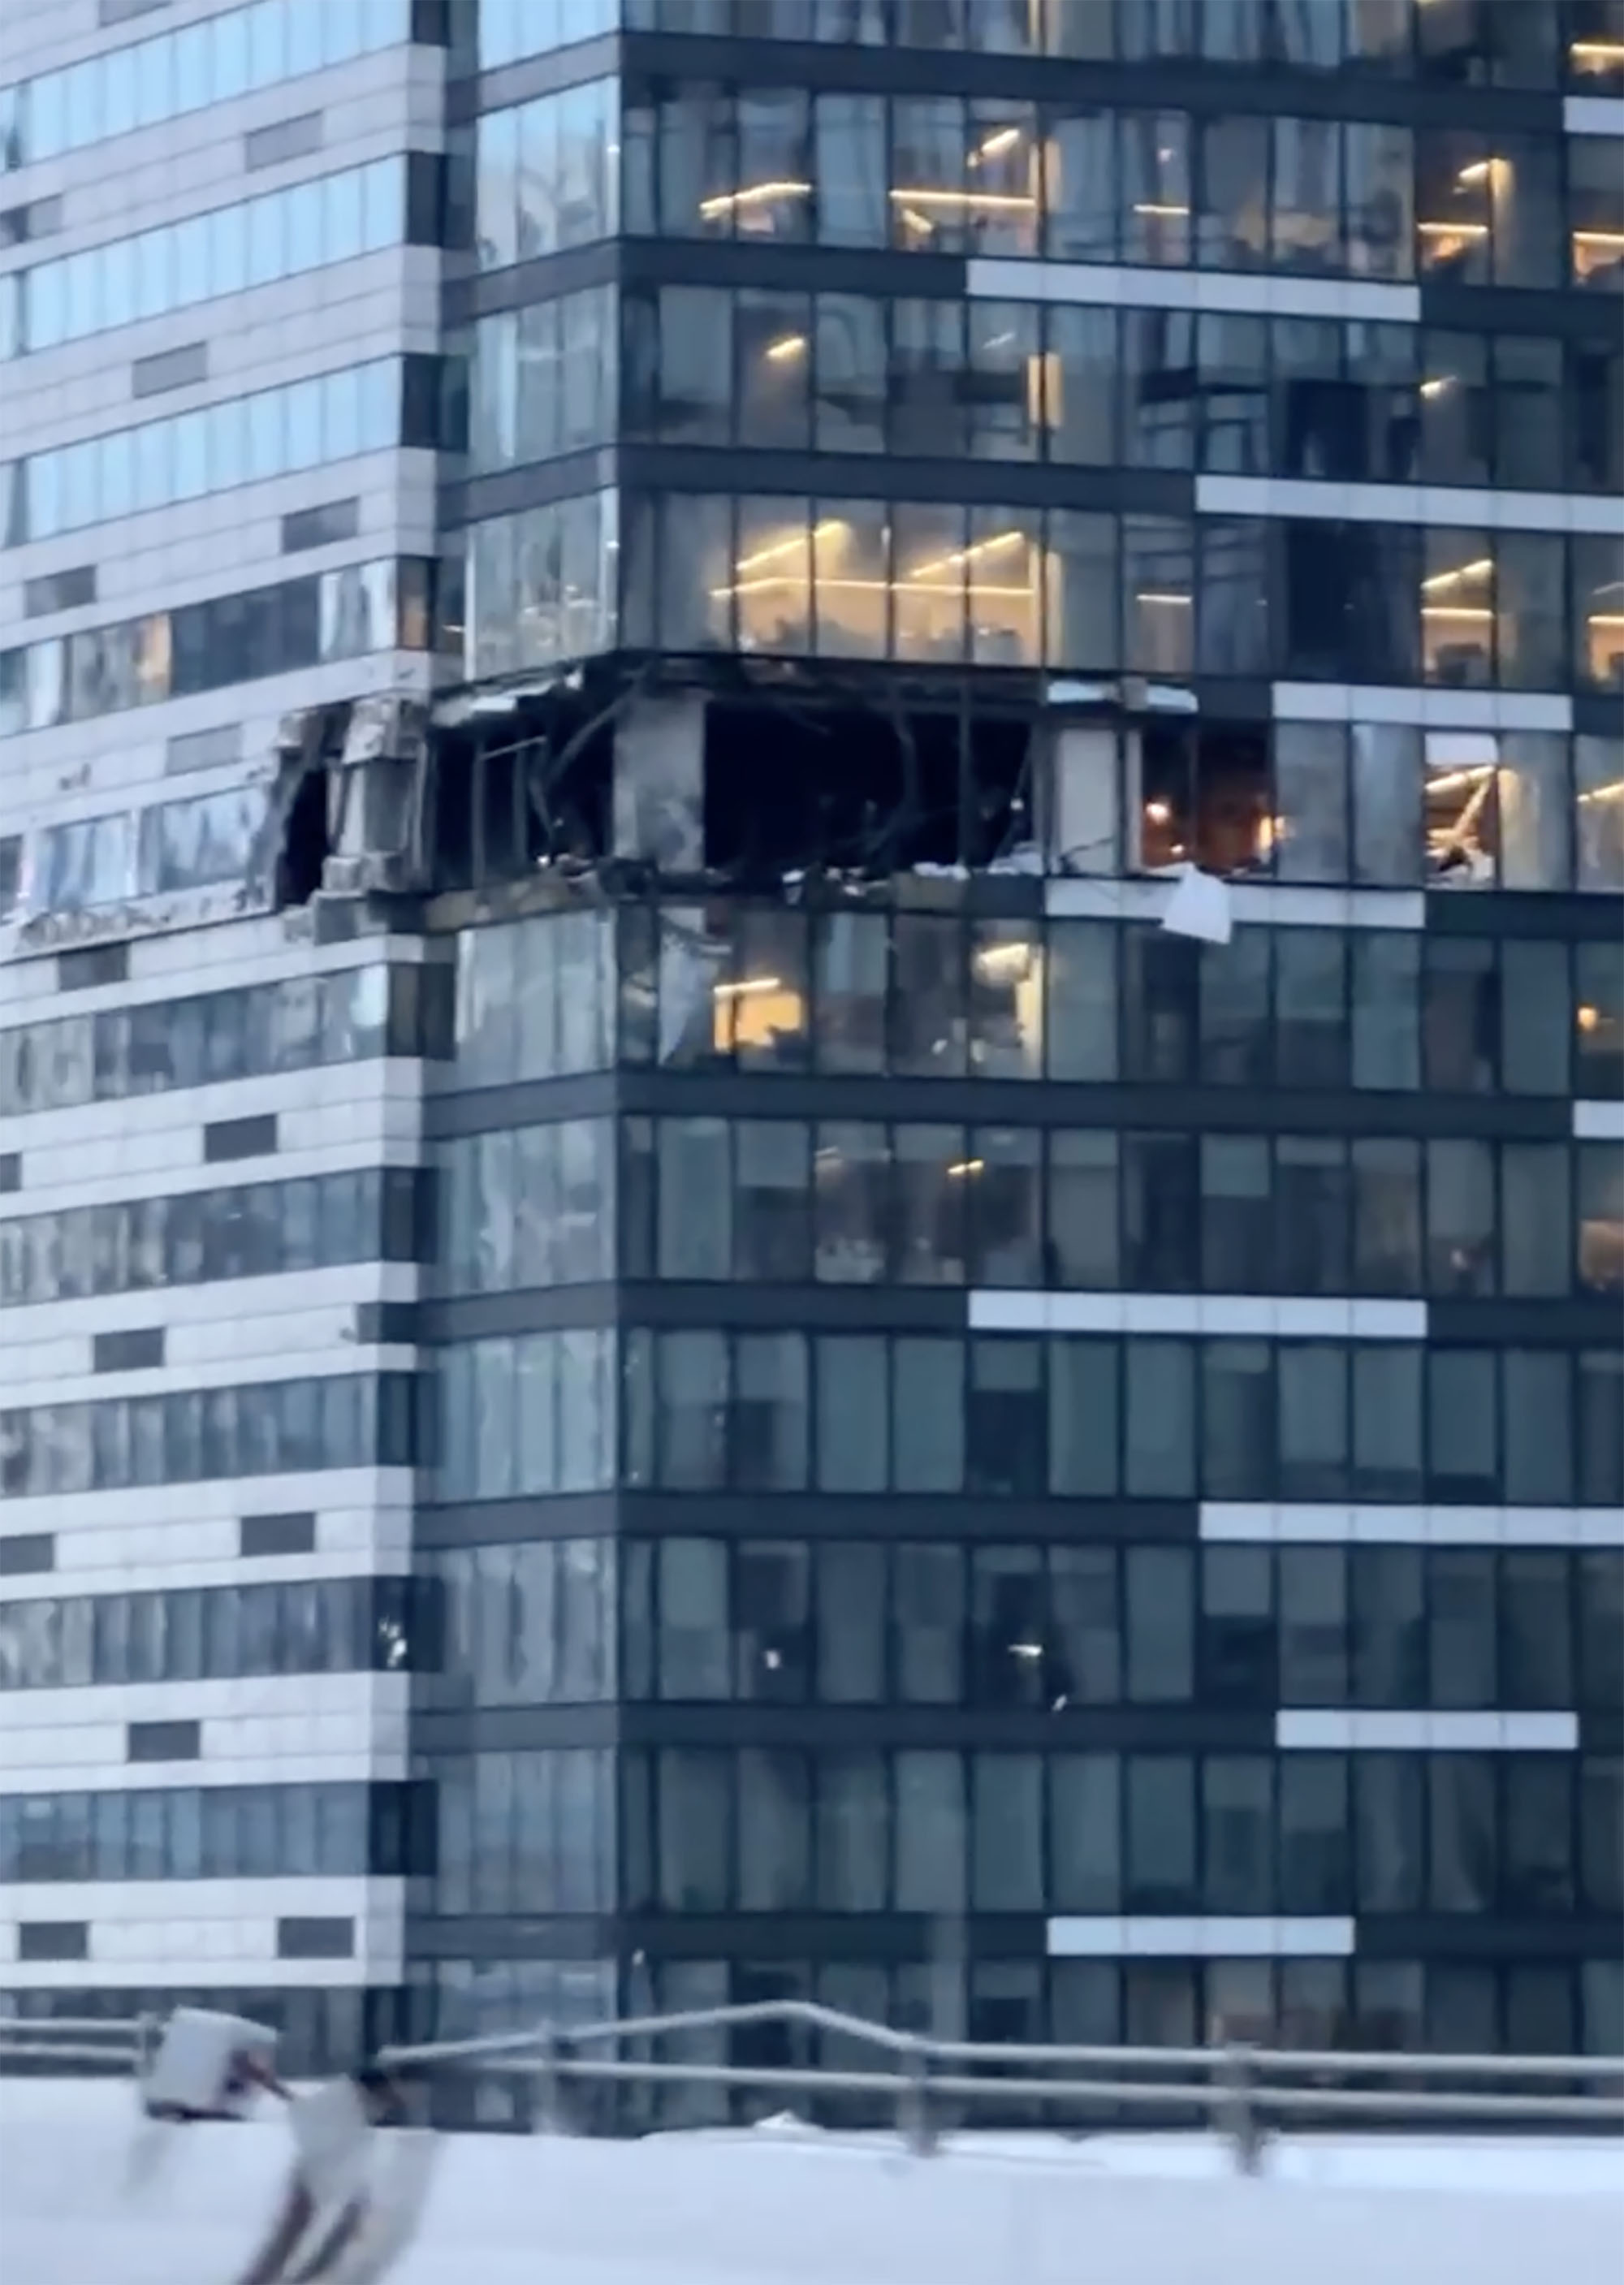 A number of prominent buildings and residential skyscrapers were damaged